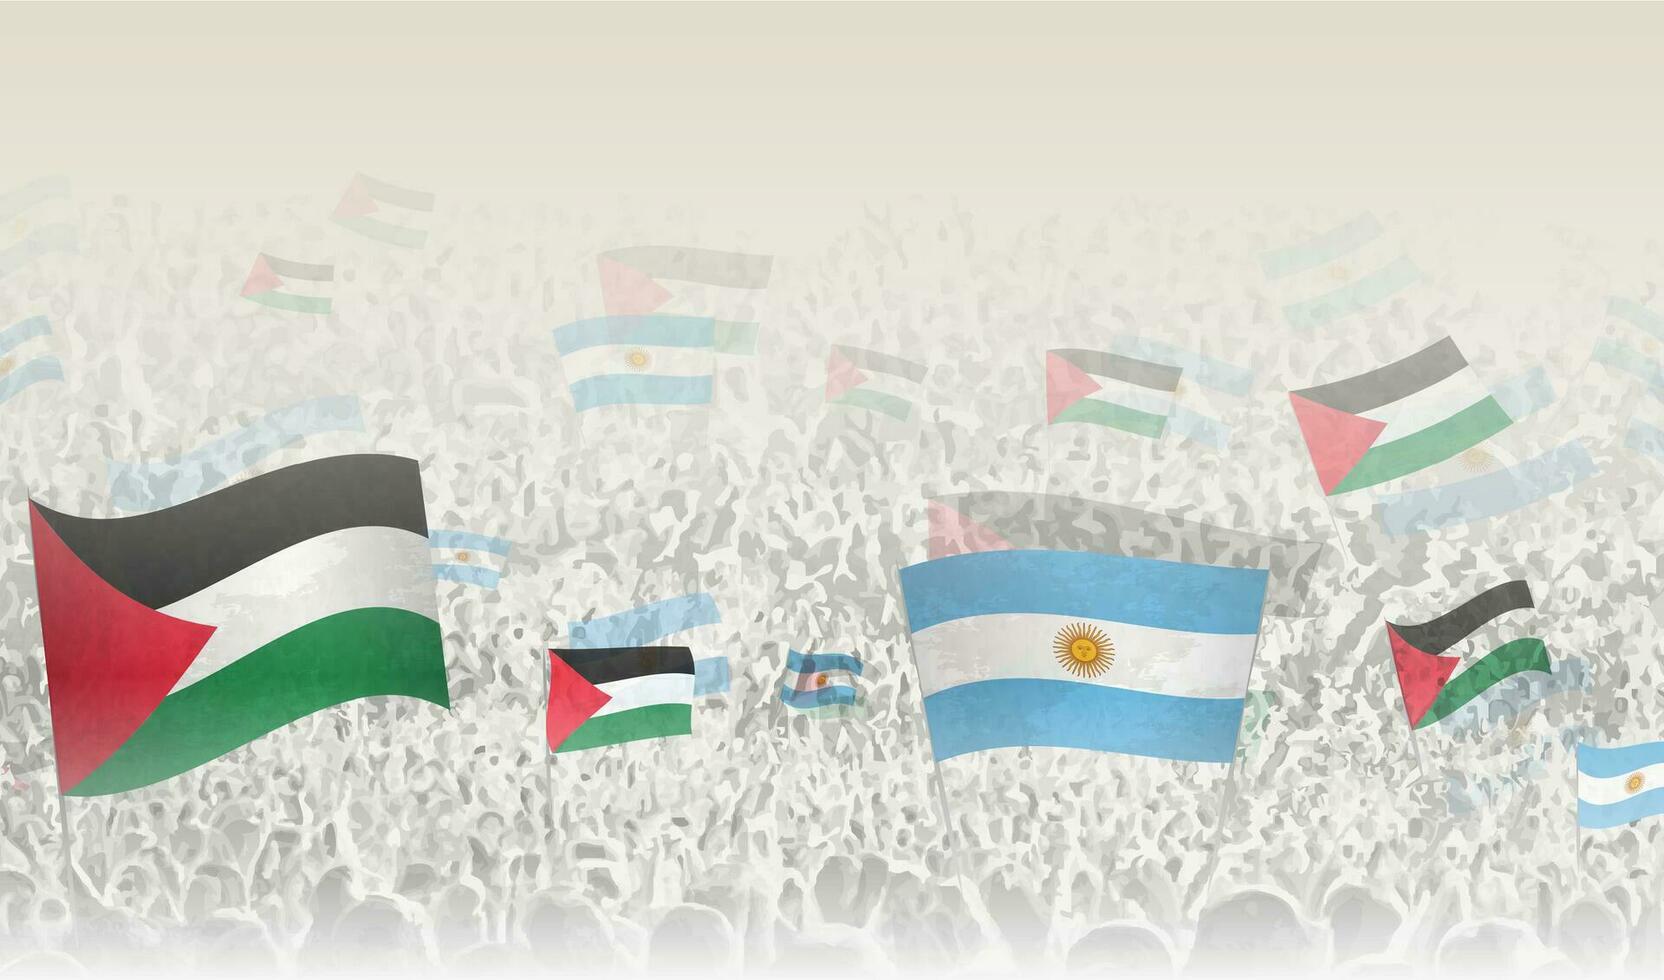 Palestine and Argentina flags in a crowd of cheering people. vector